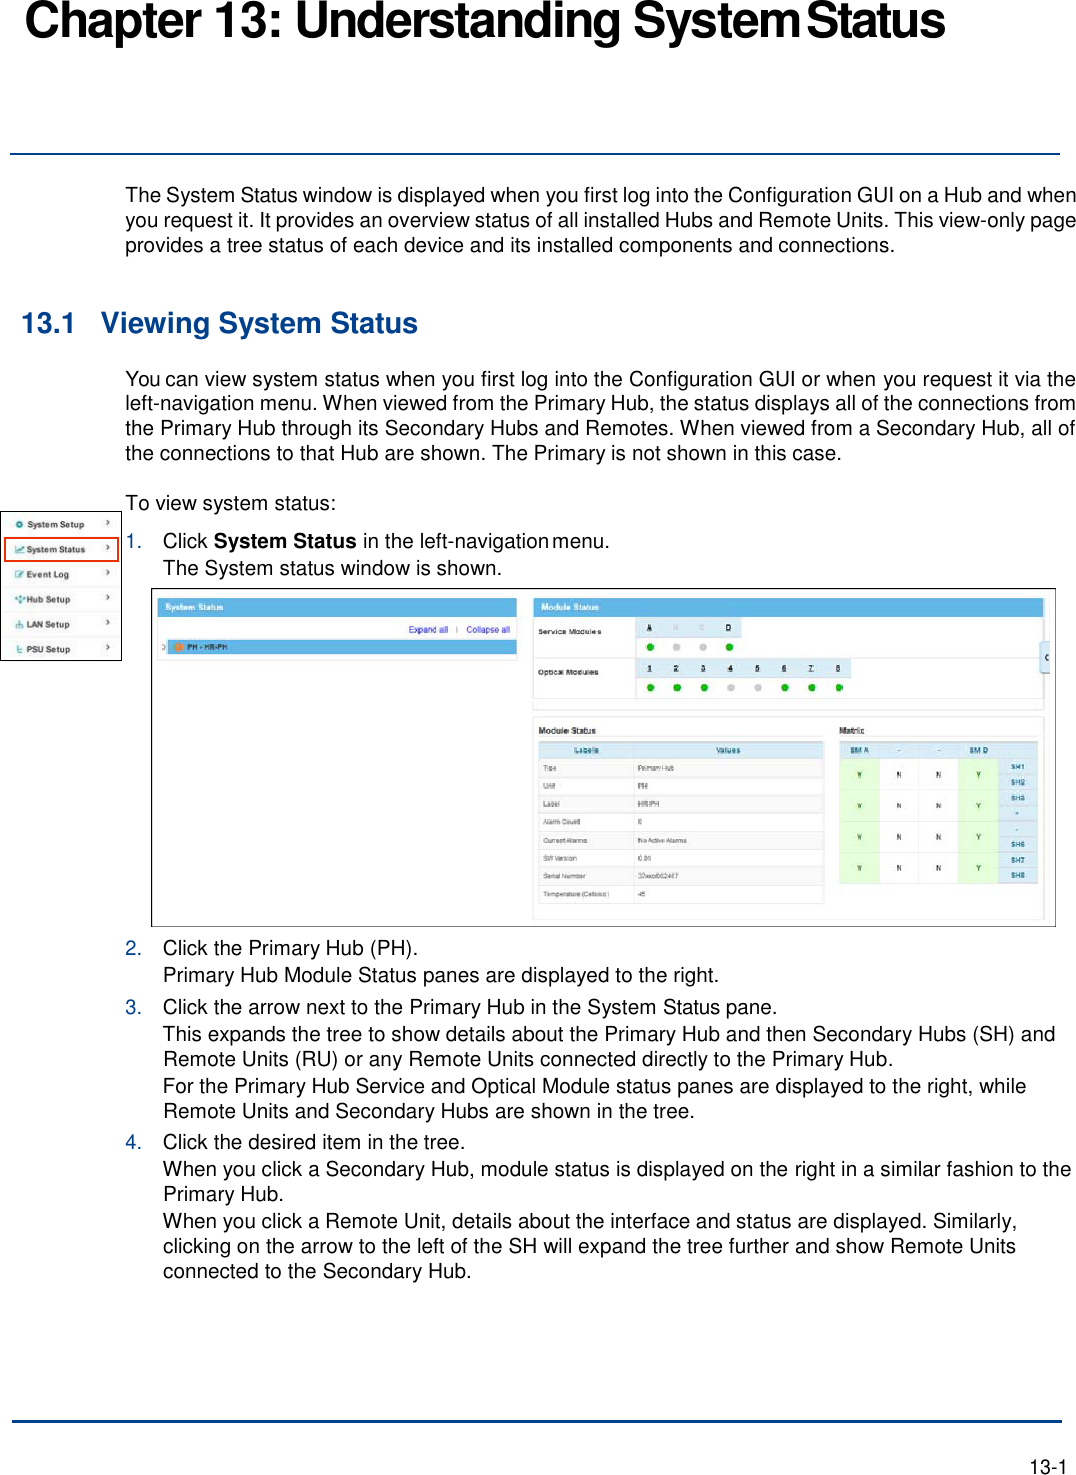 Chapter 13: Understanding System Status     The System Status window is displayed when you first log into the Configuration GUI on a Hub and when you request it. It provides an overview status of all installed Hubs and Remote Units. This view-only page provides a tree status of each device and its installed components and connections.   13.1 Viewing System Status You can view system status when you first log into the Configuration GUI or when you request it via the left-navigation menu. When viewed from the Primary Hub, the status displays all of the connections from the Primary Hub through its Secondary Hubs and Remotes. When viewed from a Secondary Hub, all of the connections to that Hub are shown. The Primary is not shown in this case.  To view system status: 1. Click System Status in the left-navigation menu. The System status window is shown. 2. Click the Primary Hub (PH). Primary Hub Module Status panes are displayed to the right. 3. Click the arrow next to the Primary Hub in the System Status pane. This expands the tree to show details about the Primary Hub and then Secondary Hubs (SH) and Remote Units (RU) or any Remote Units connected directly to the Primary Hub. For the Primary Hub Service and Optical Module status panes are displayed to the right, while Remote Units and Secondary Hubs are shown in the tree. 4. Click the desired item in the tree. When you click a Secondary Hub, module status is displayed on the right in a similar fashion to the Primary Hub. When you click a Remote Unit, details about the interface and status are displayed. Similarly, clicking on the arrow to the left of the SH will expand the tree further and show Remote Units connected to the Secondary Hub.        13-1 